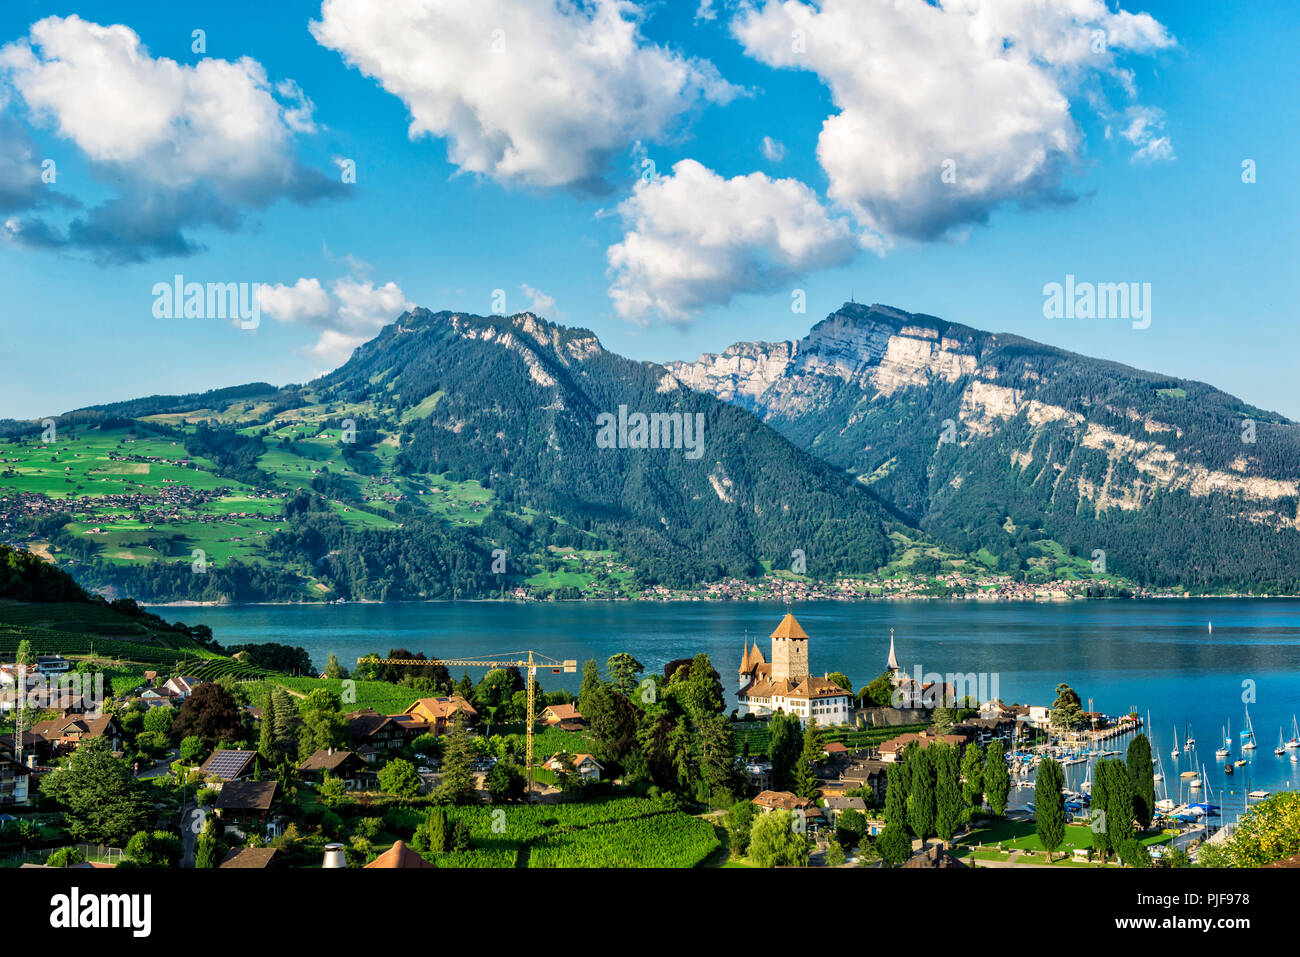 Montreux City, Switzerland View of the Mountains and City Stock Photo